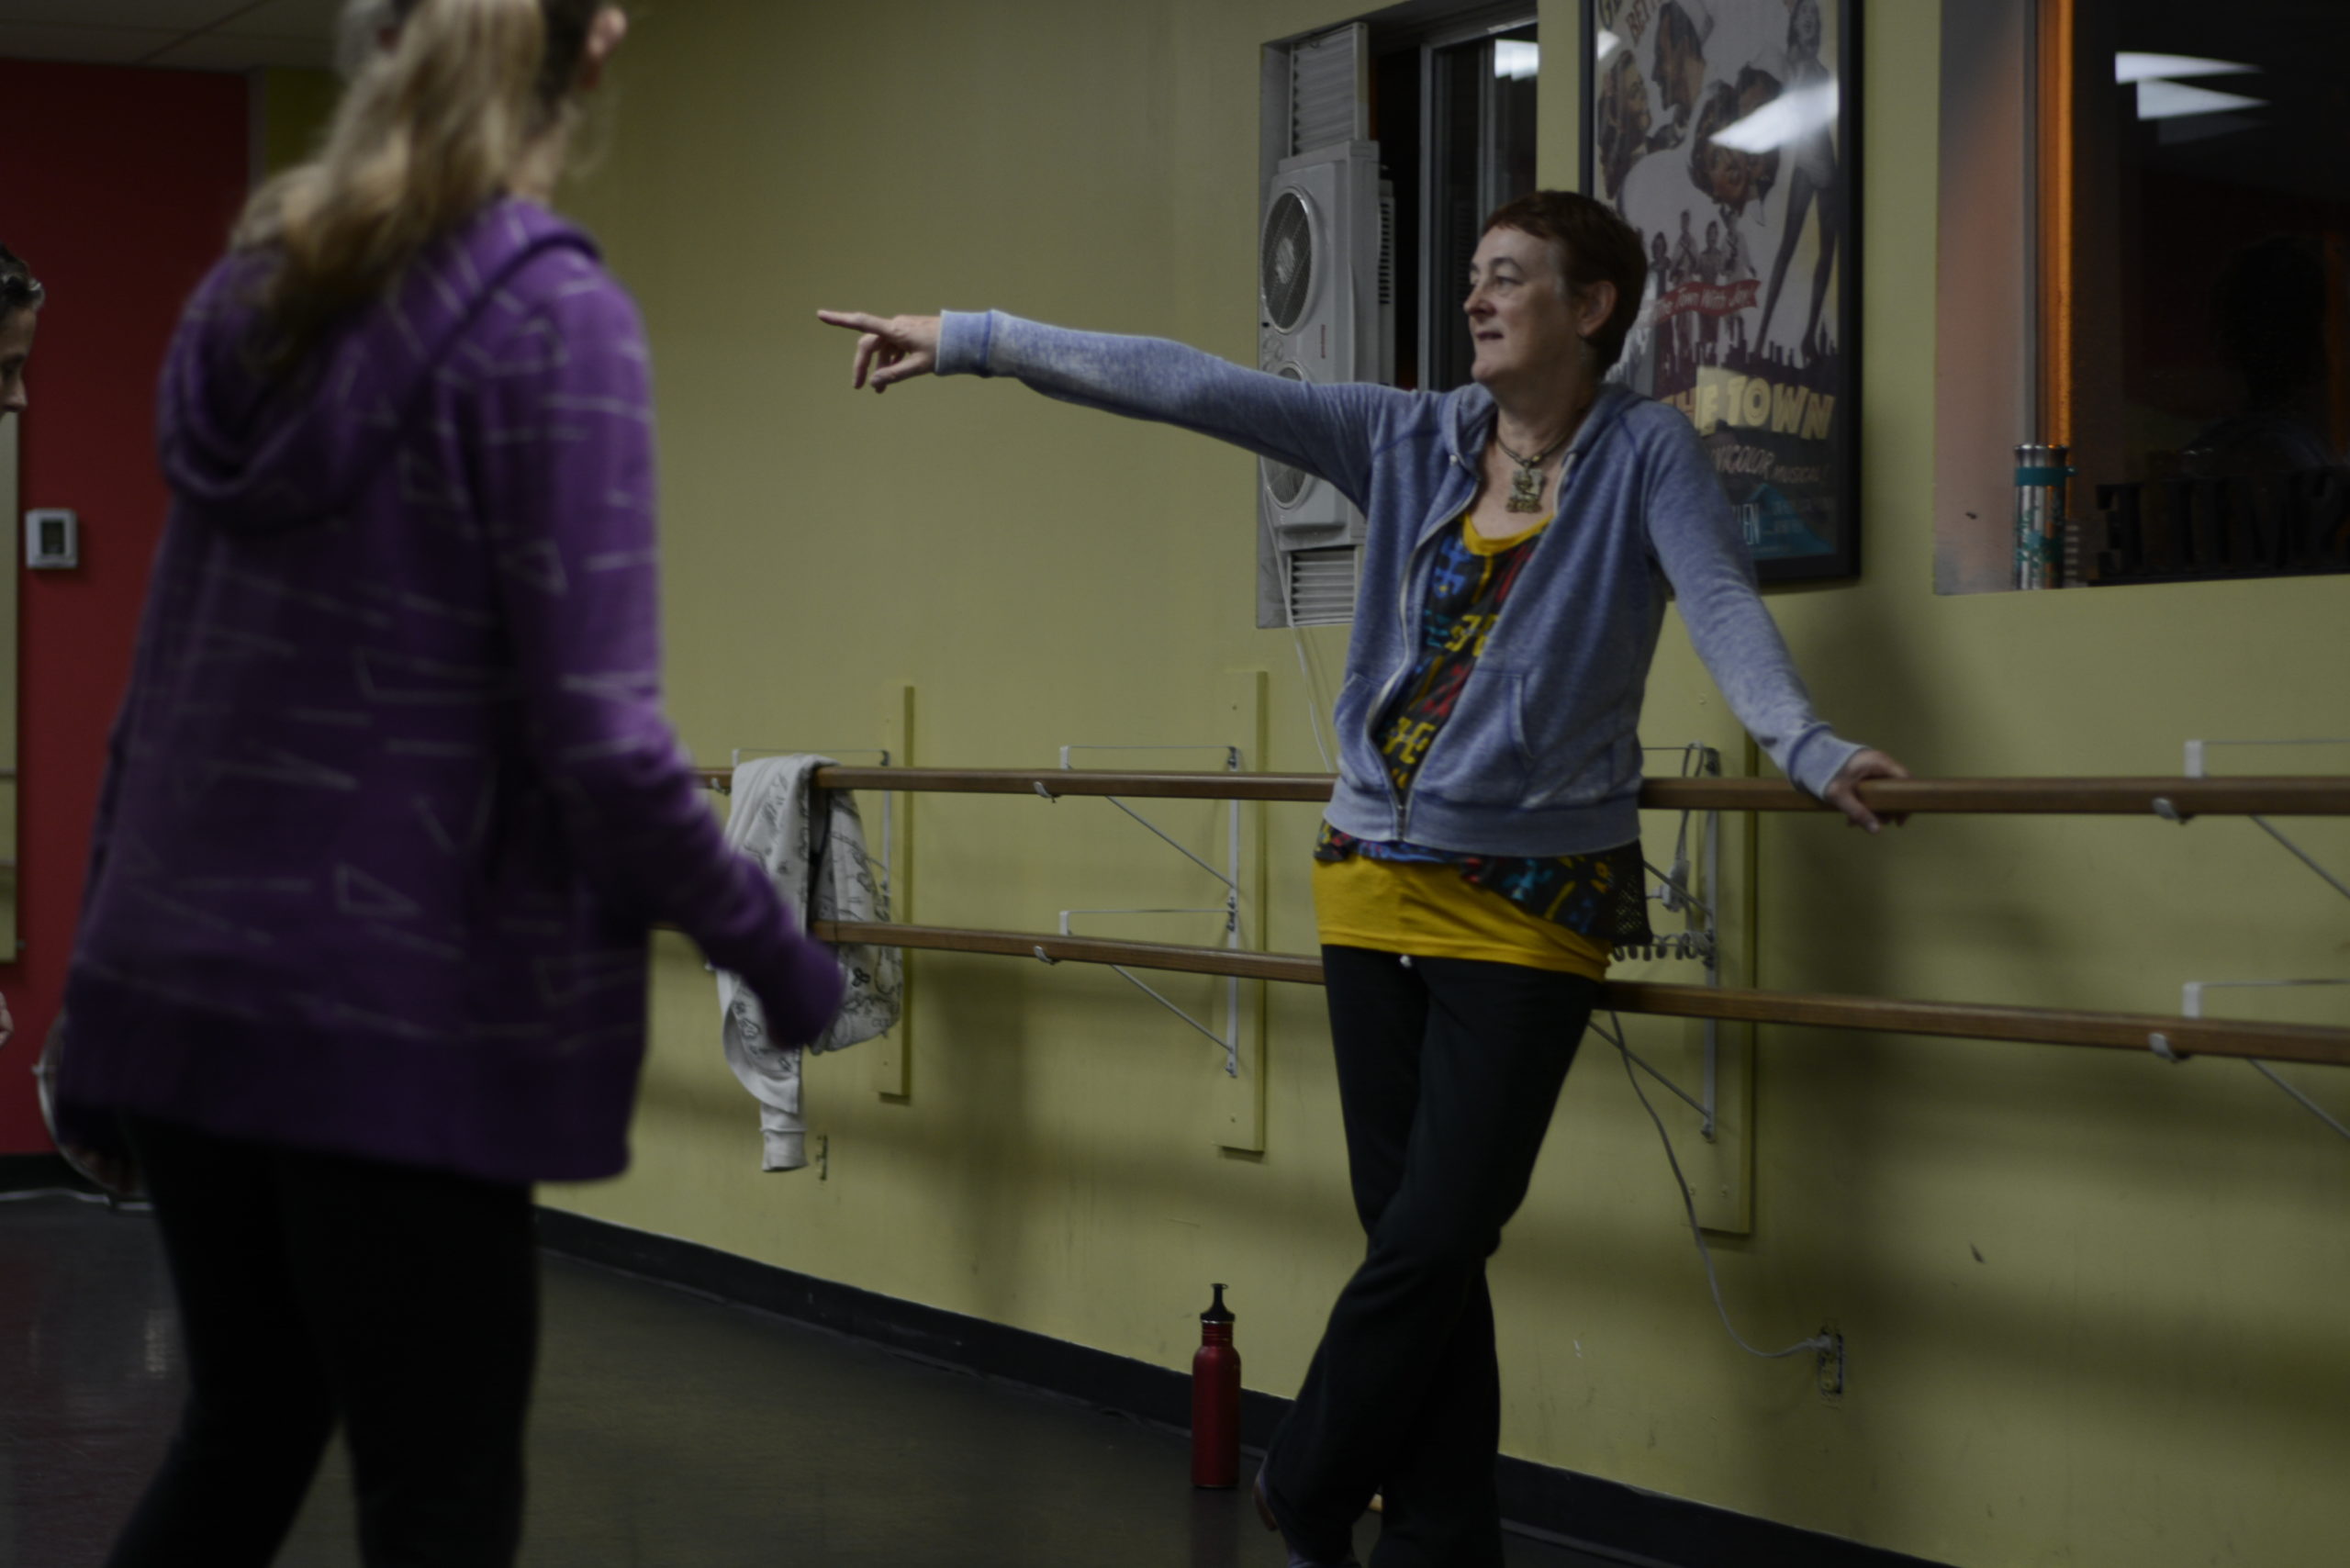 Heather Cornell, a white woman with short brown hair, leans against a ballet barre and points to the side, speaking to a woman who stands in front of her